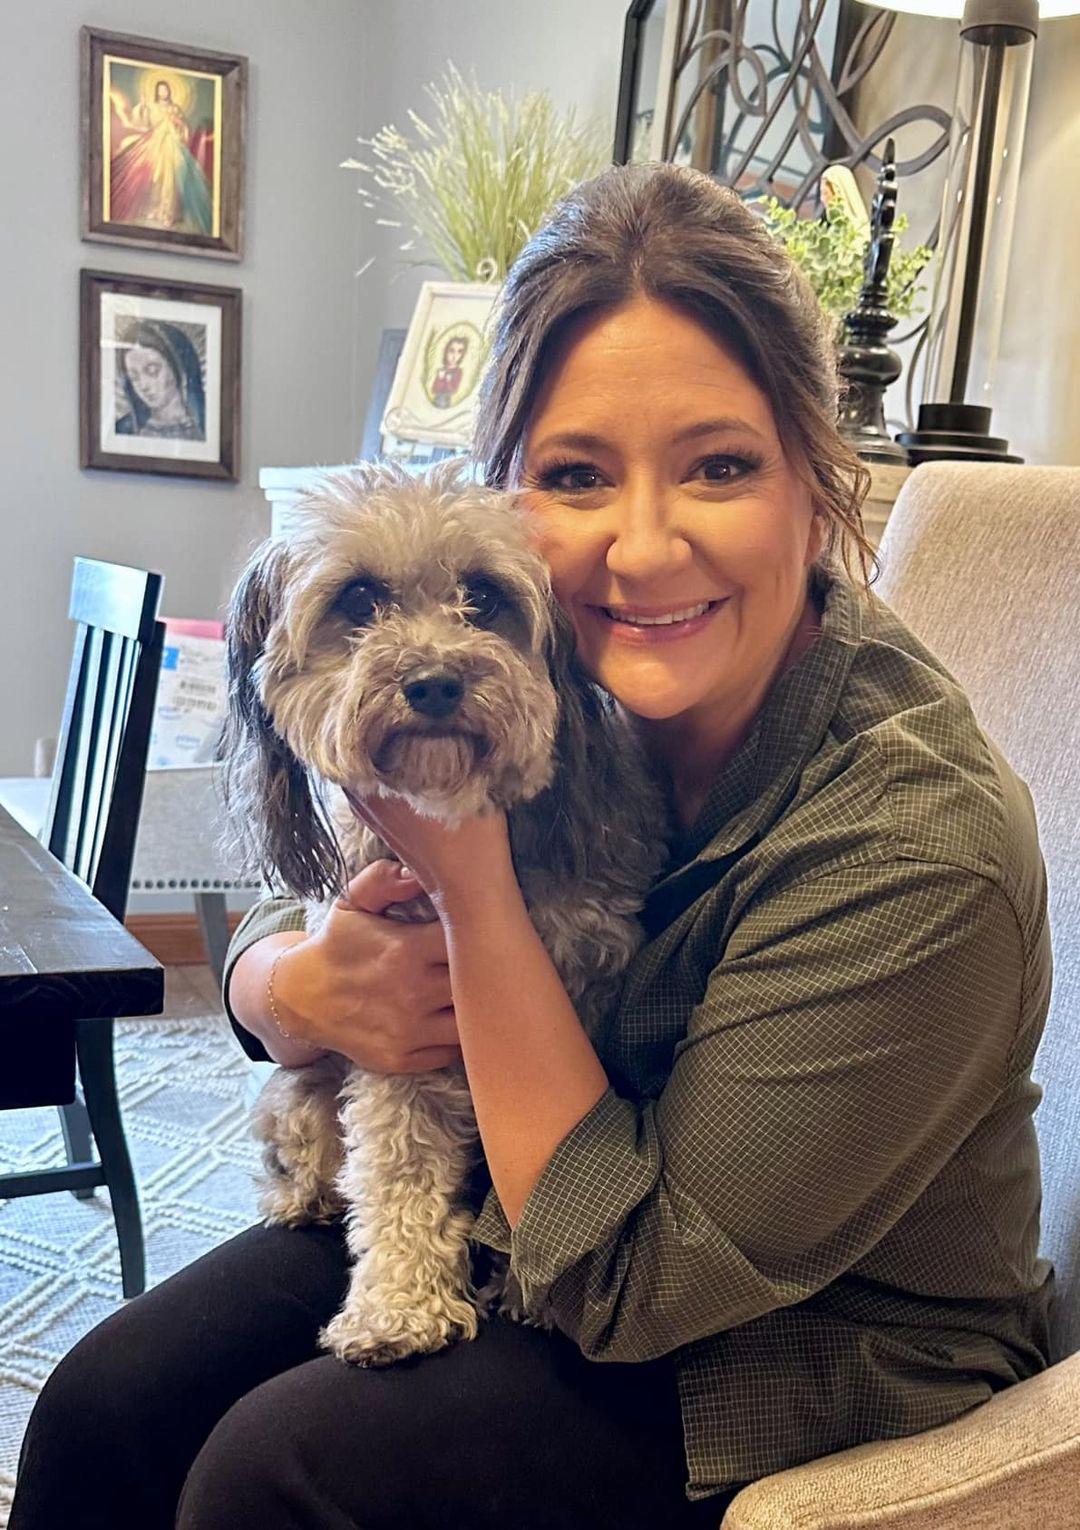 It’s National Puppy Day!! Share your puppy pics below ⬇️ Here’s my best puppy buddy, Zeke! Jennifer Mabou - State Farm Insurance Agent Sulphur (337)527-0027